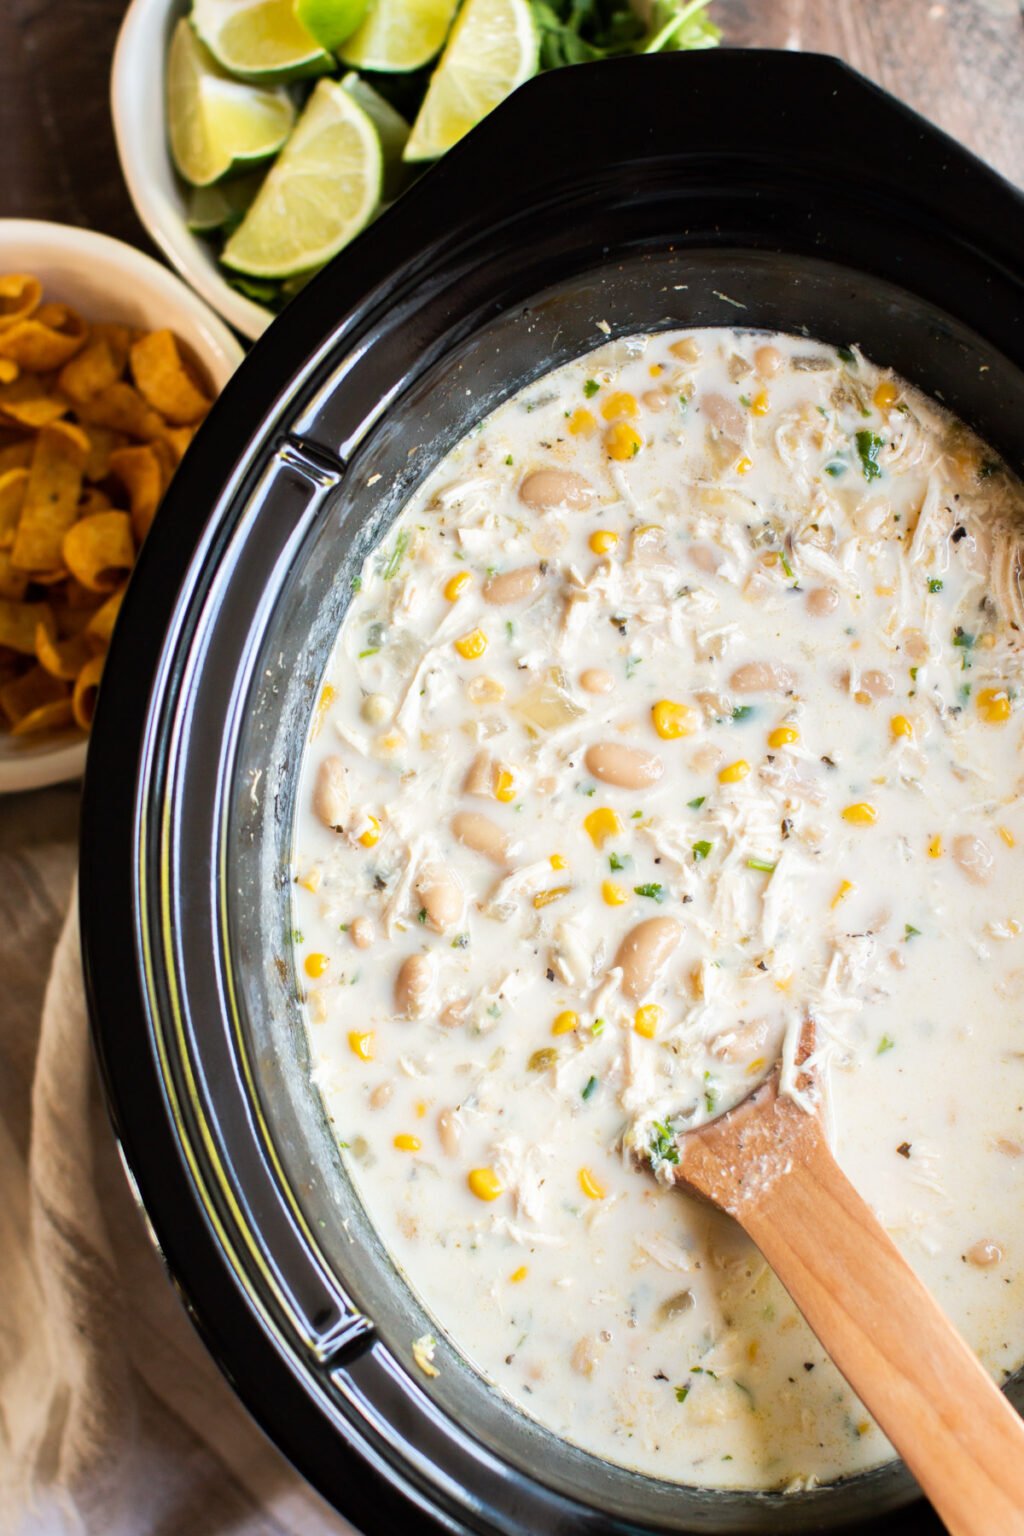 Creamy Slow Cooker White Chicken Chili Recipe - The Magical Slow Cooker